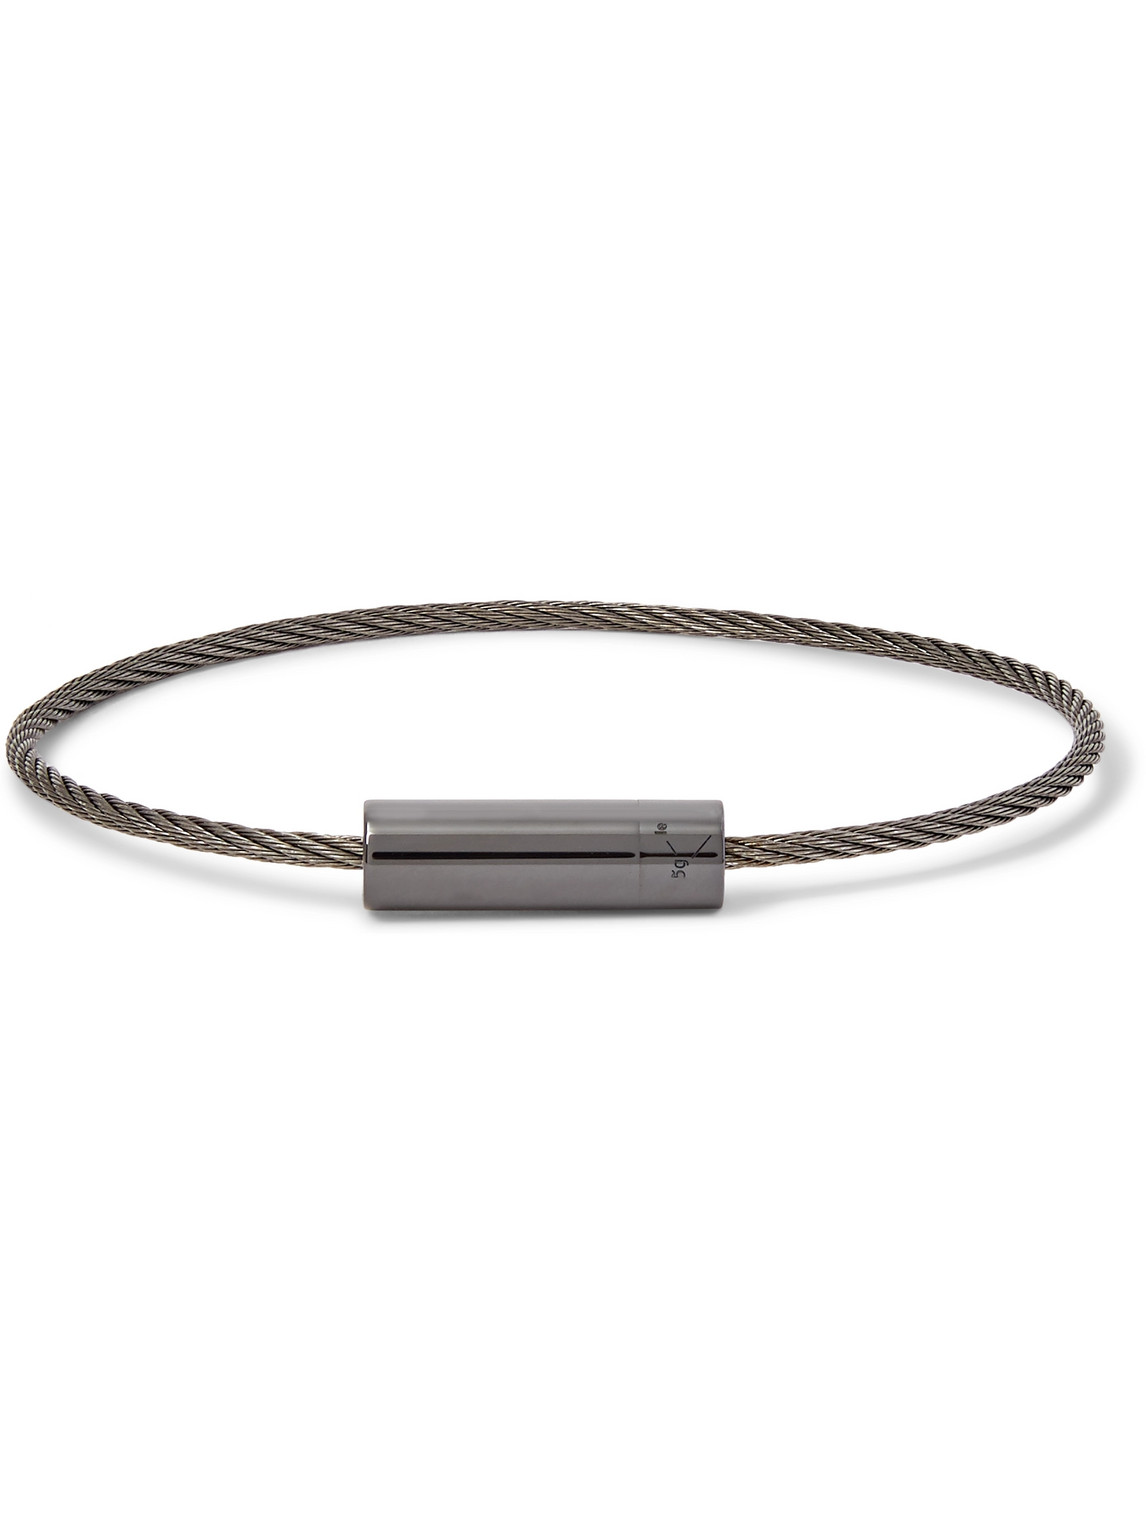 Le Gramme Le Câble 5 Brushed Sterling Silver And Ceramic Bracelet In Metallic